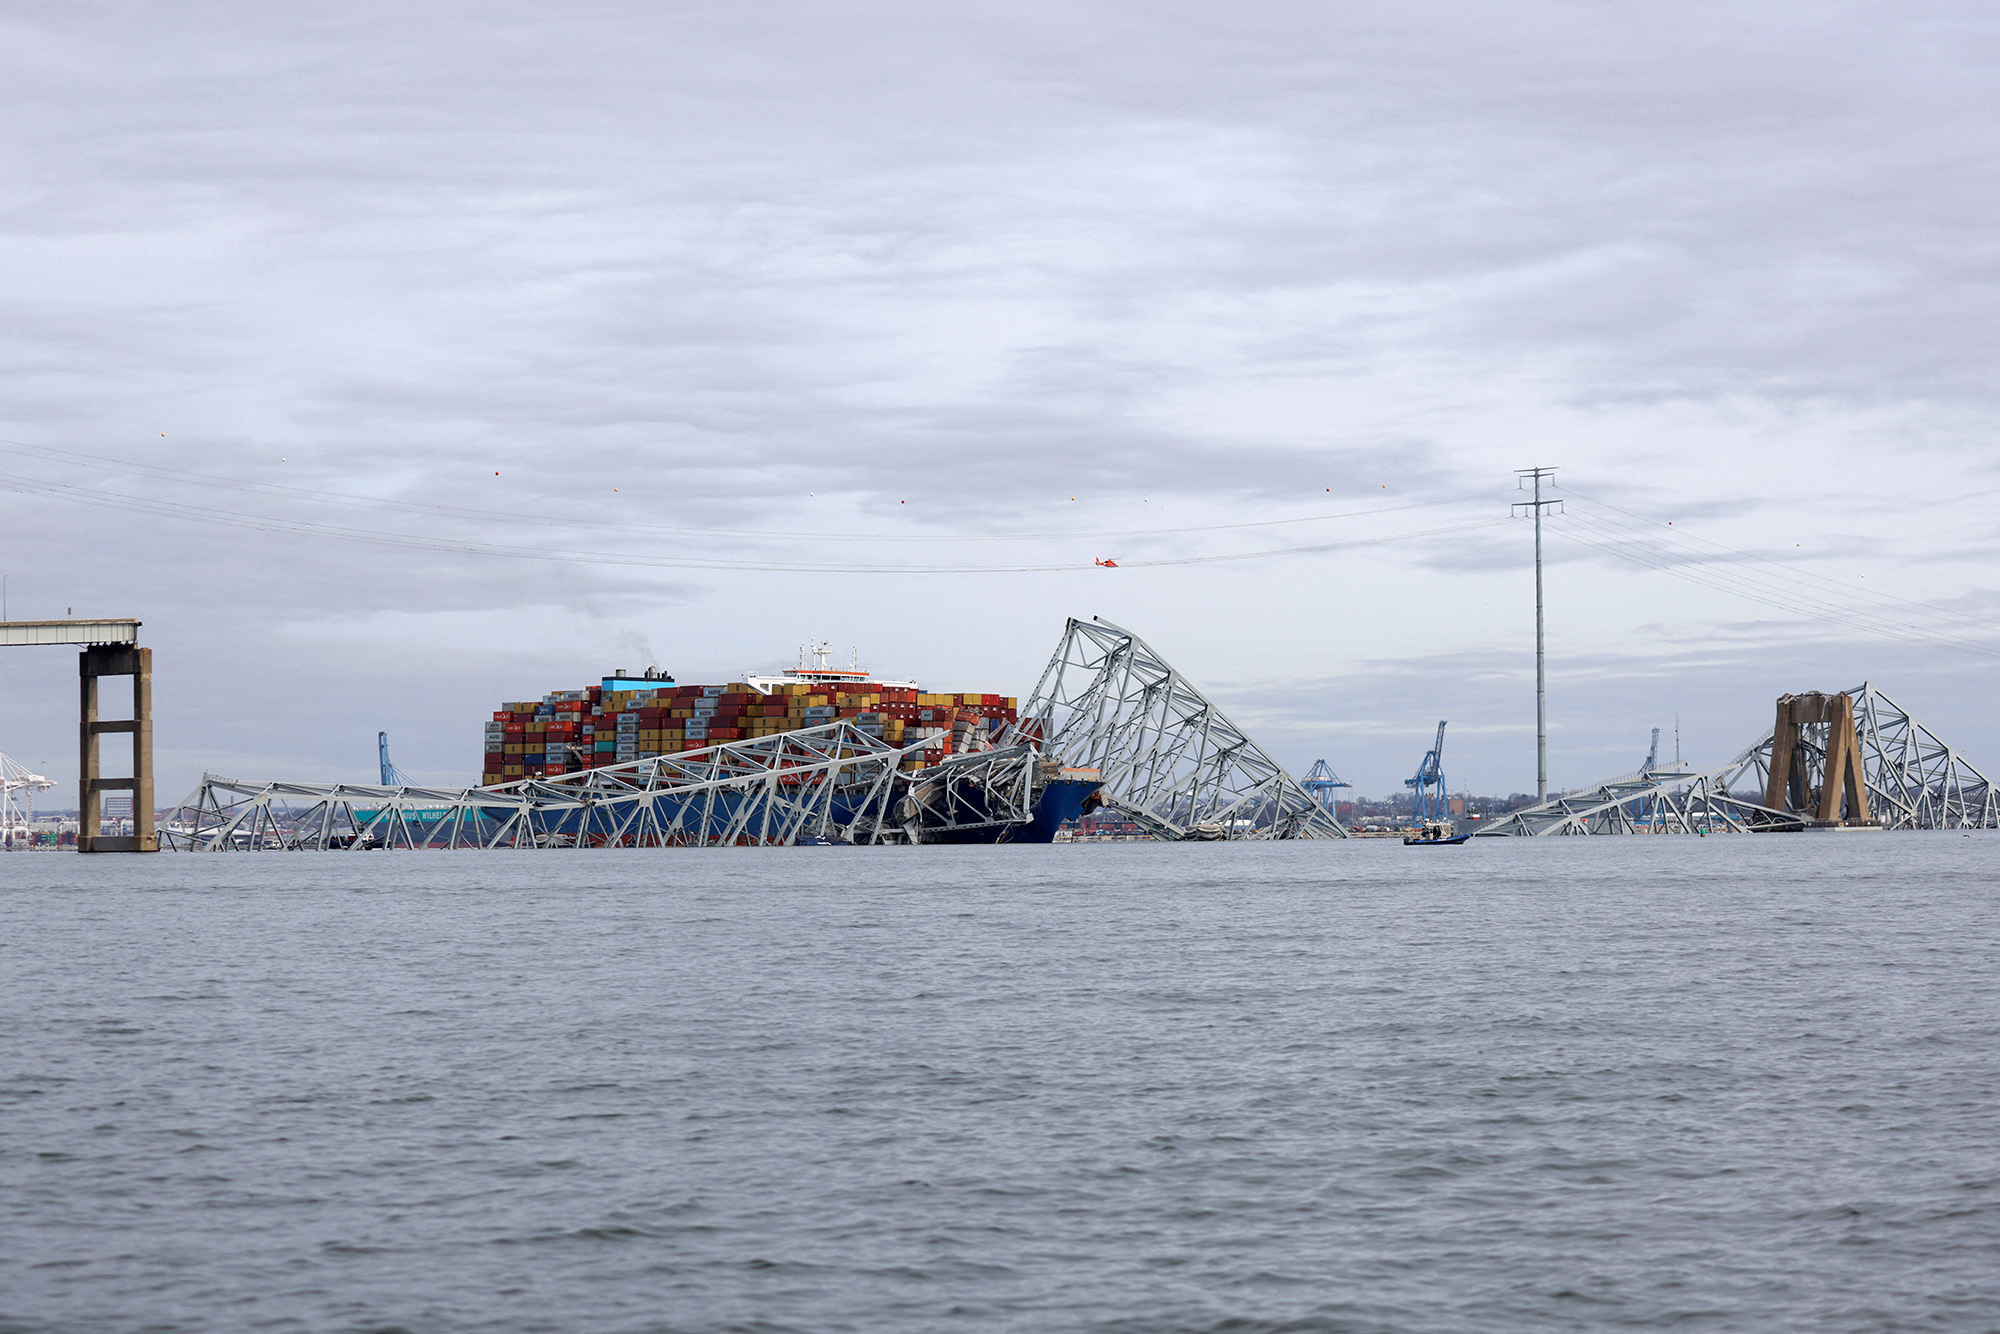 A view of the Dali cargo vessel which crashed into the Francis Scott Key Bridge causing it to collapse in Baltimore, Maryland, on March 26.